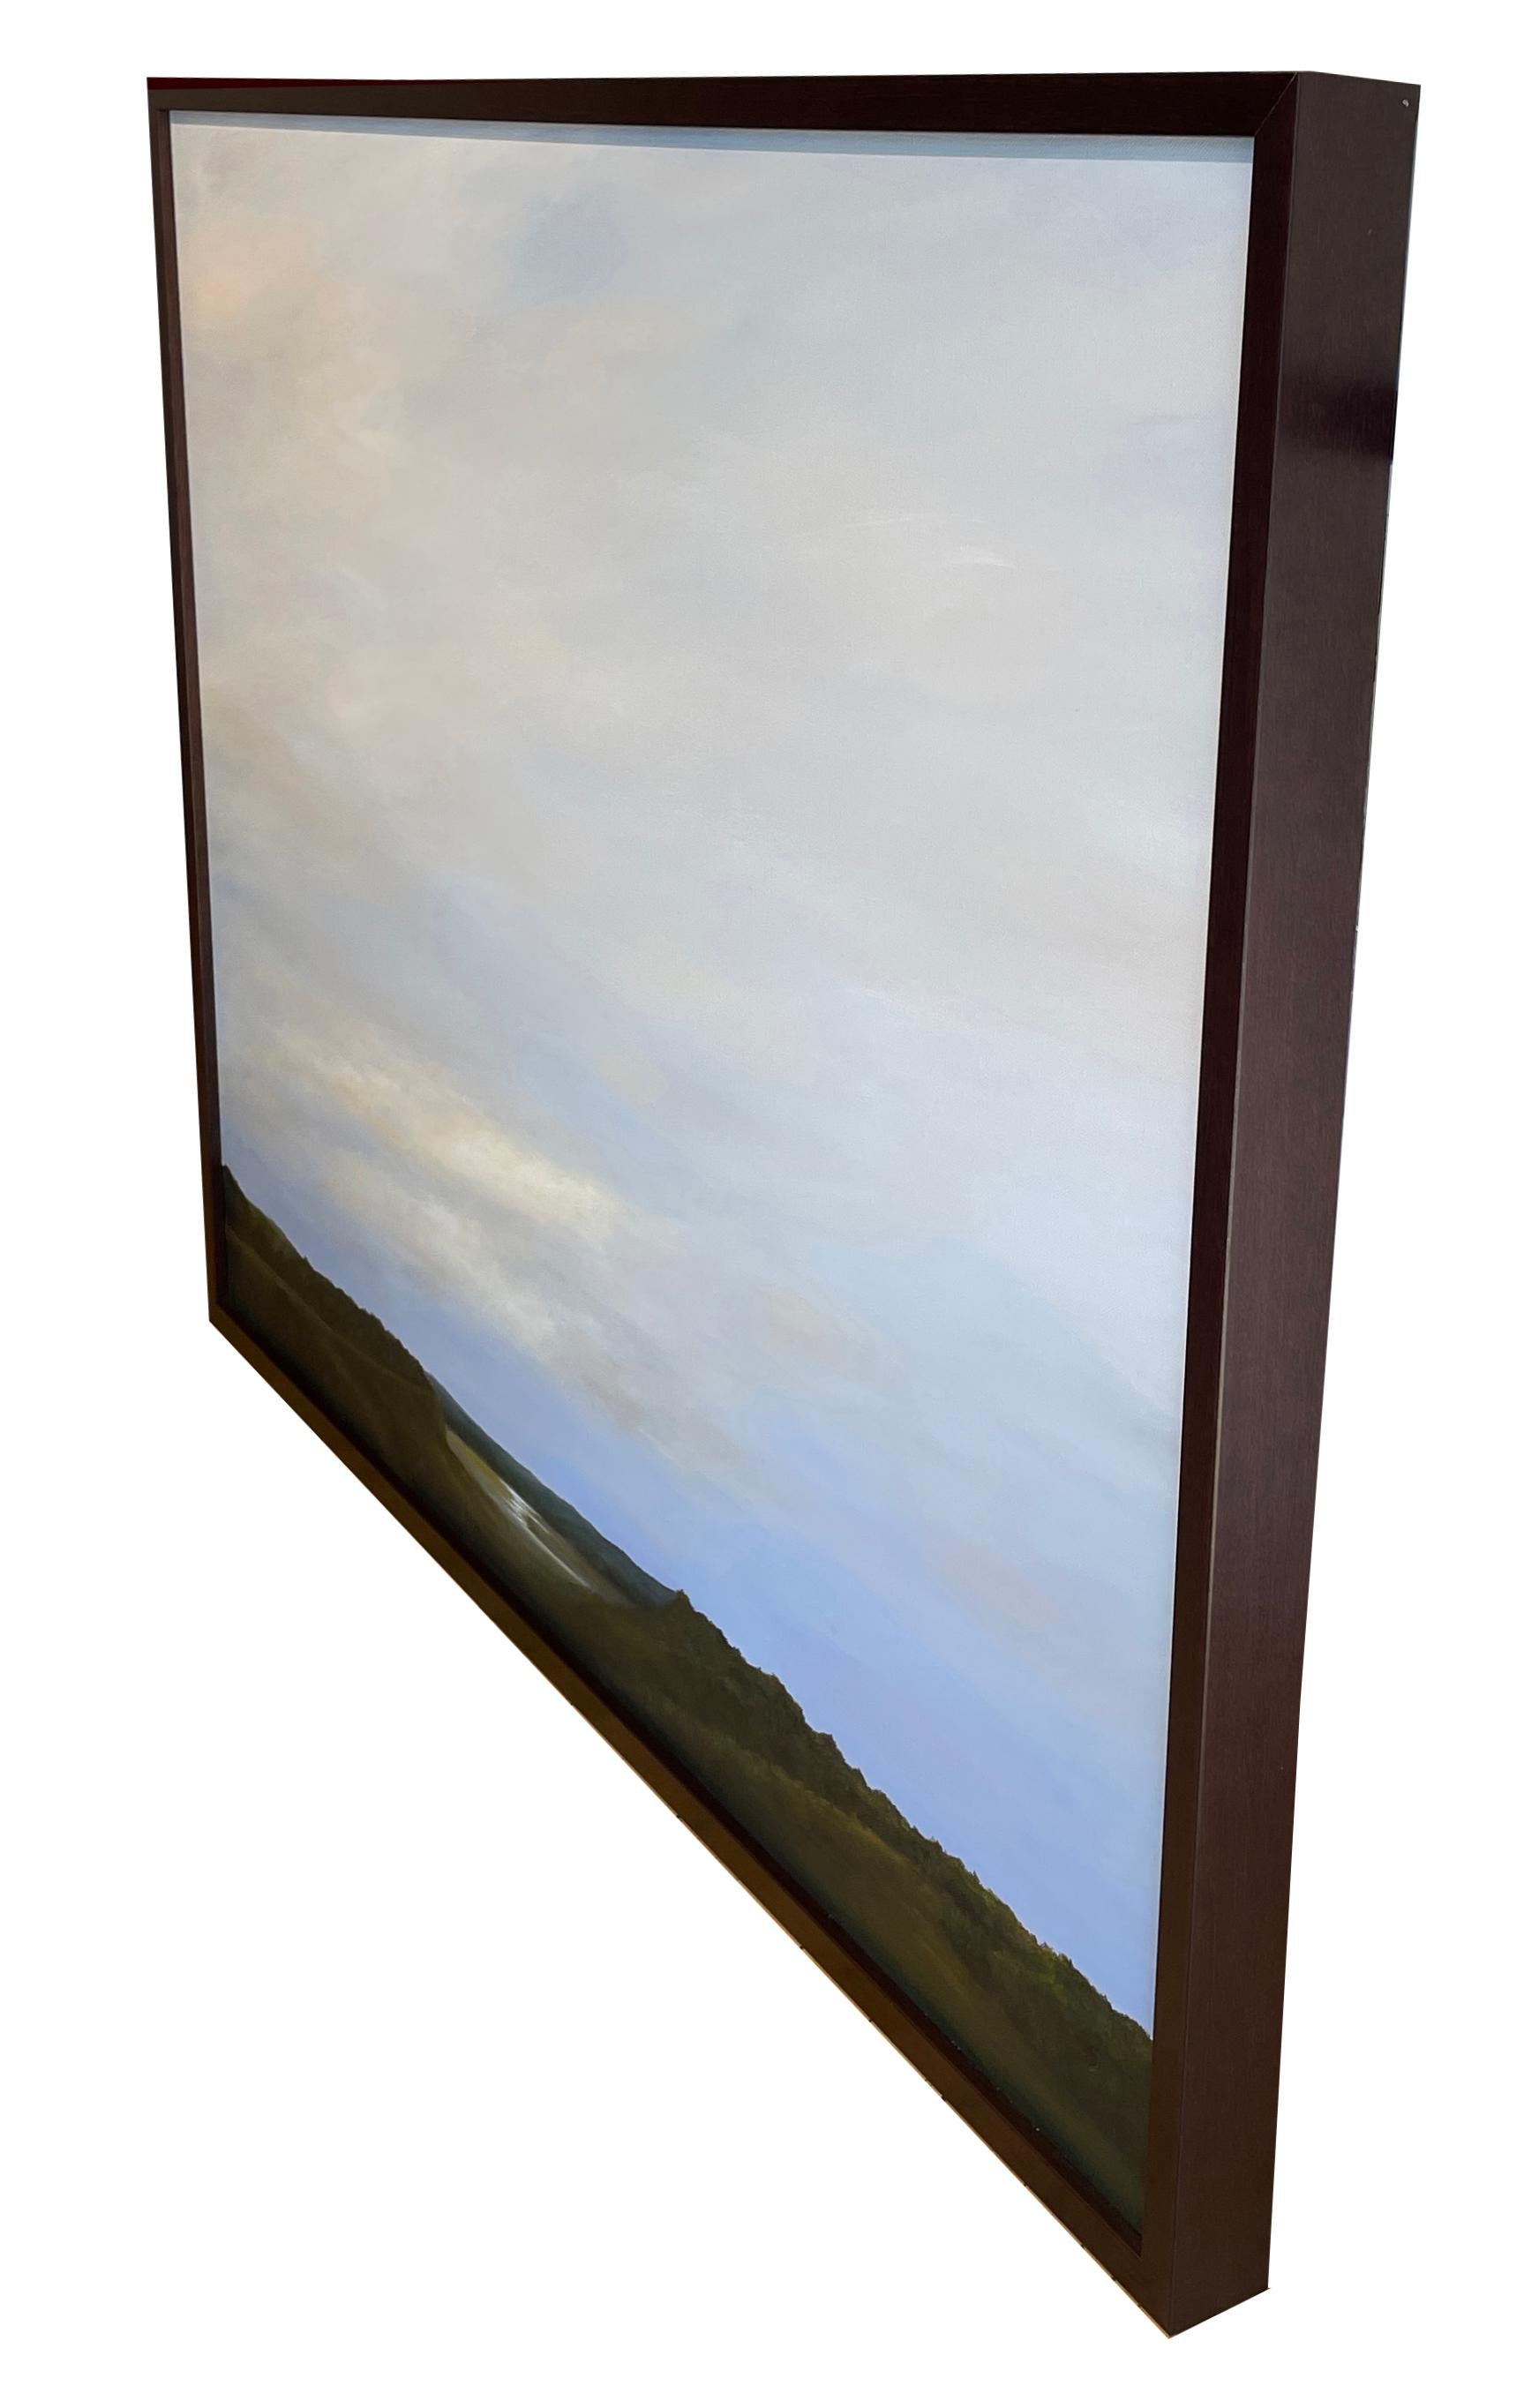 The sun tries to peak through the cloud filled sky as it casts a yellow hue to the horizon.  The reflection is seen on the pond below adding to the serene calm of this original oil painting.  It is framed in a simple dark wooden frame measuring 31 x